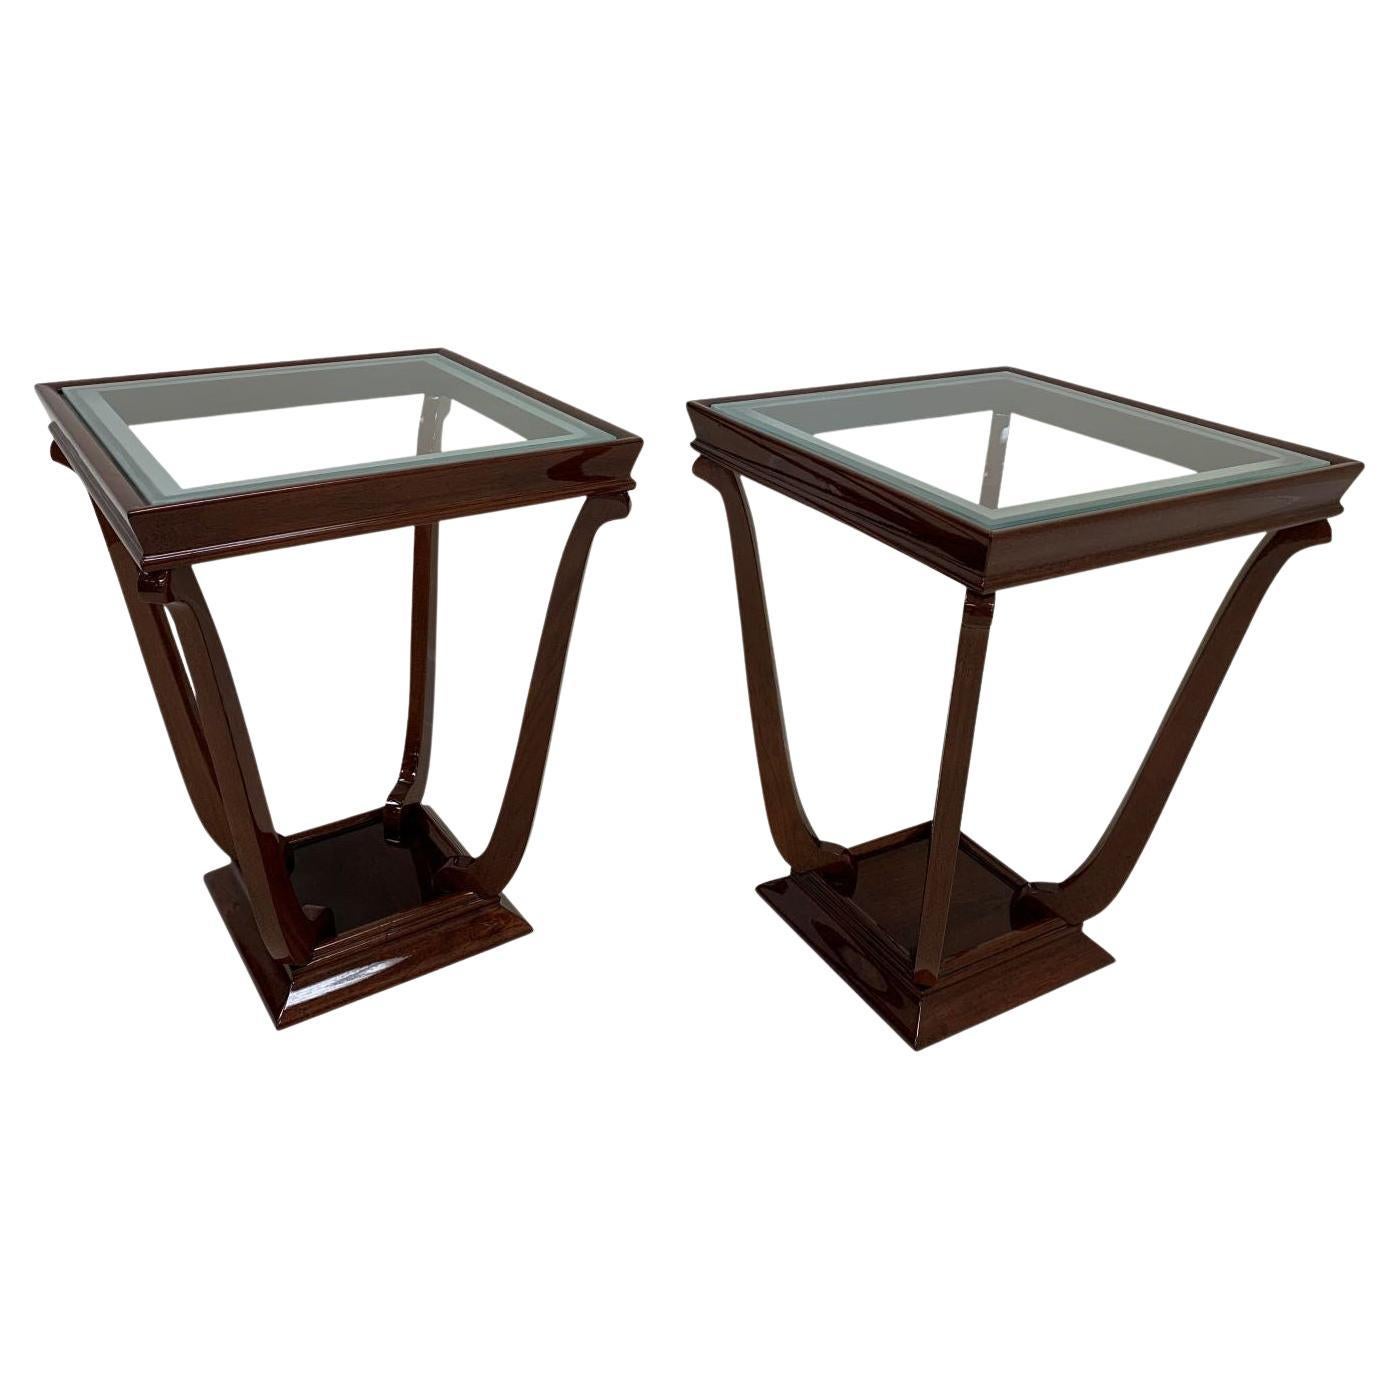 Pair of French Style Streamline Art Deco Glass Top Side Tables